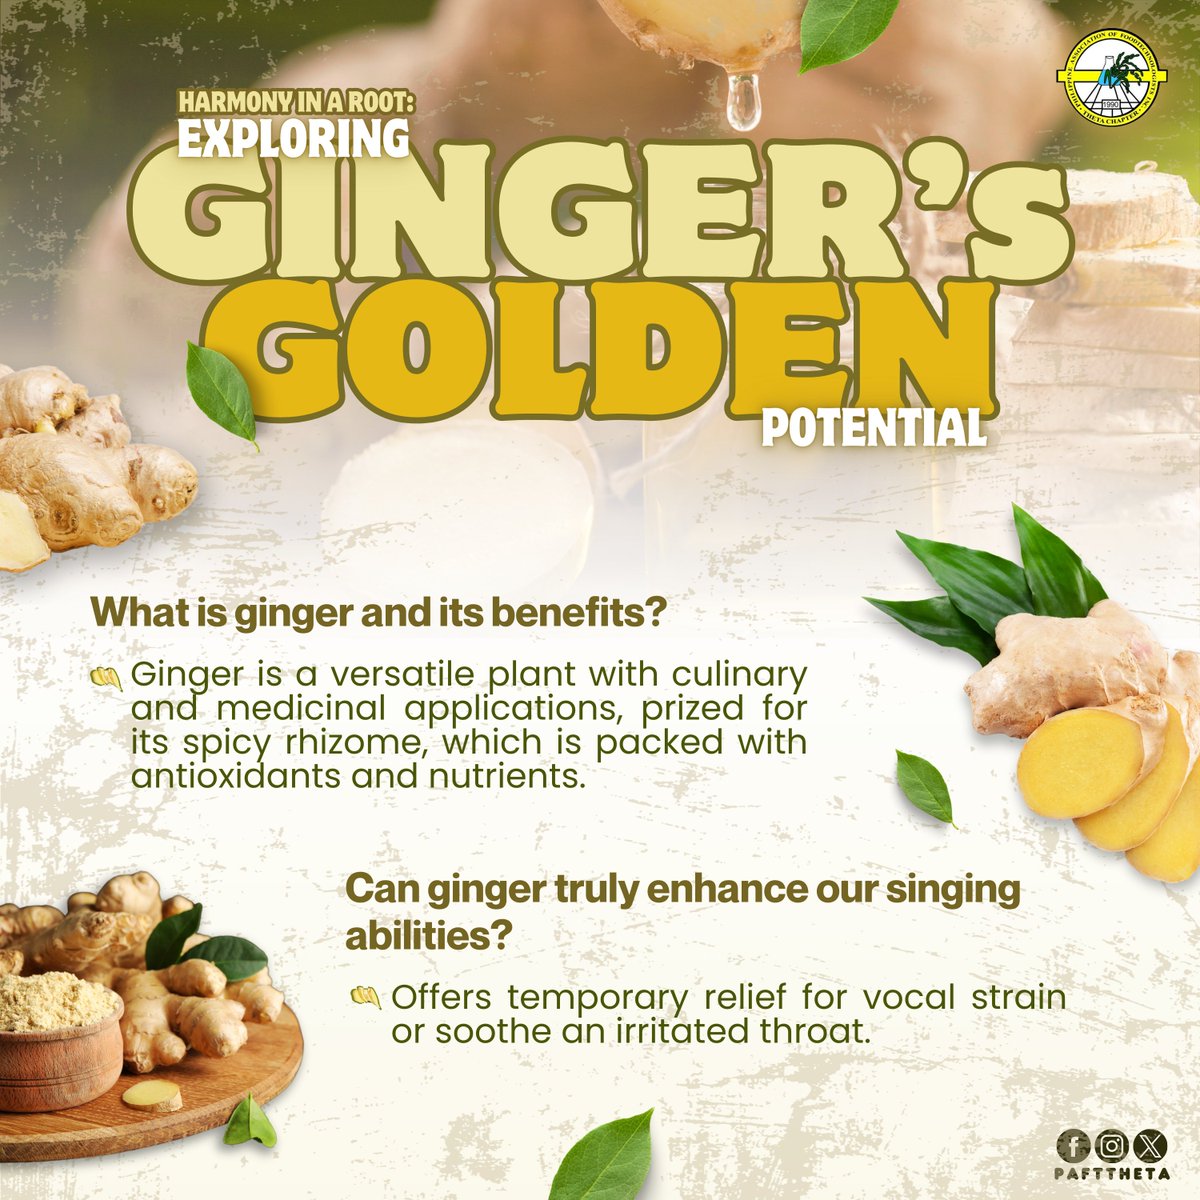 Does ginger really improve our singing voice? 🤔

Let's answer this question by exploring the golden potential of ginger into the publication below!

#PAFTTheta
#FoodTechFacts
#FeedTheNation